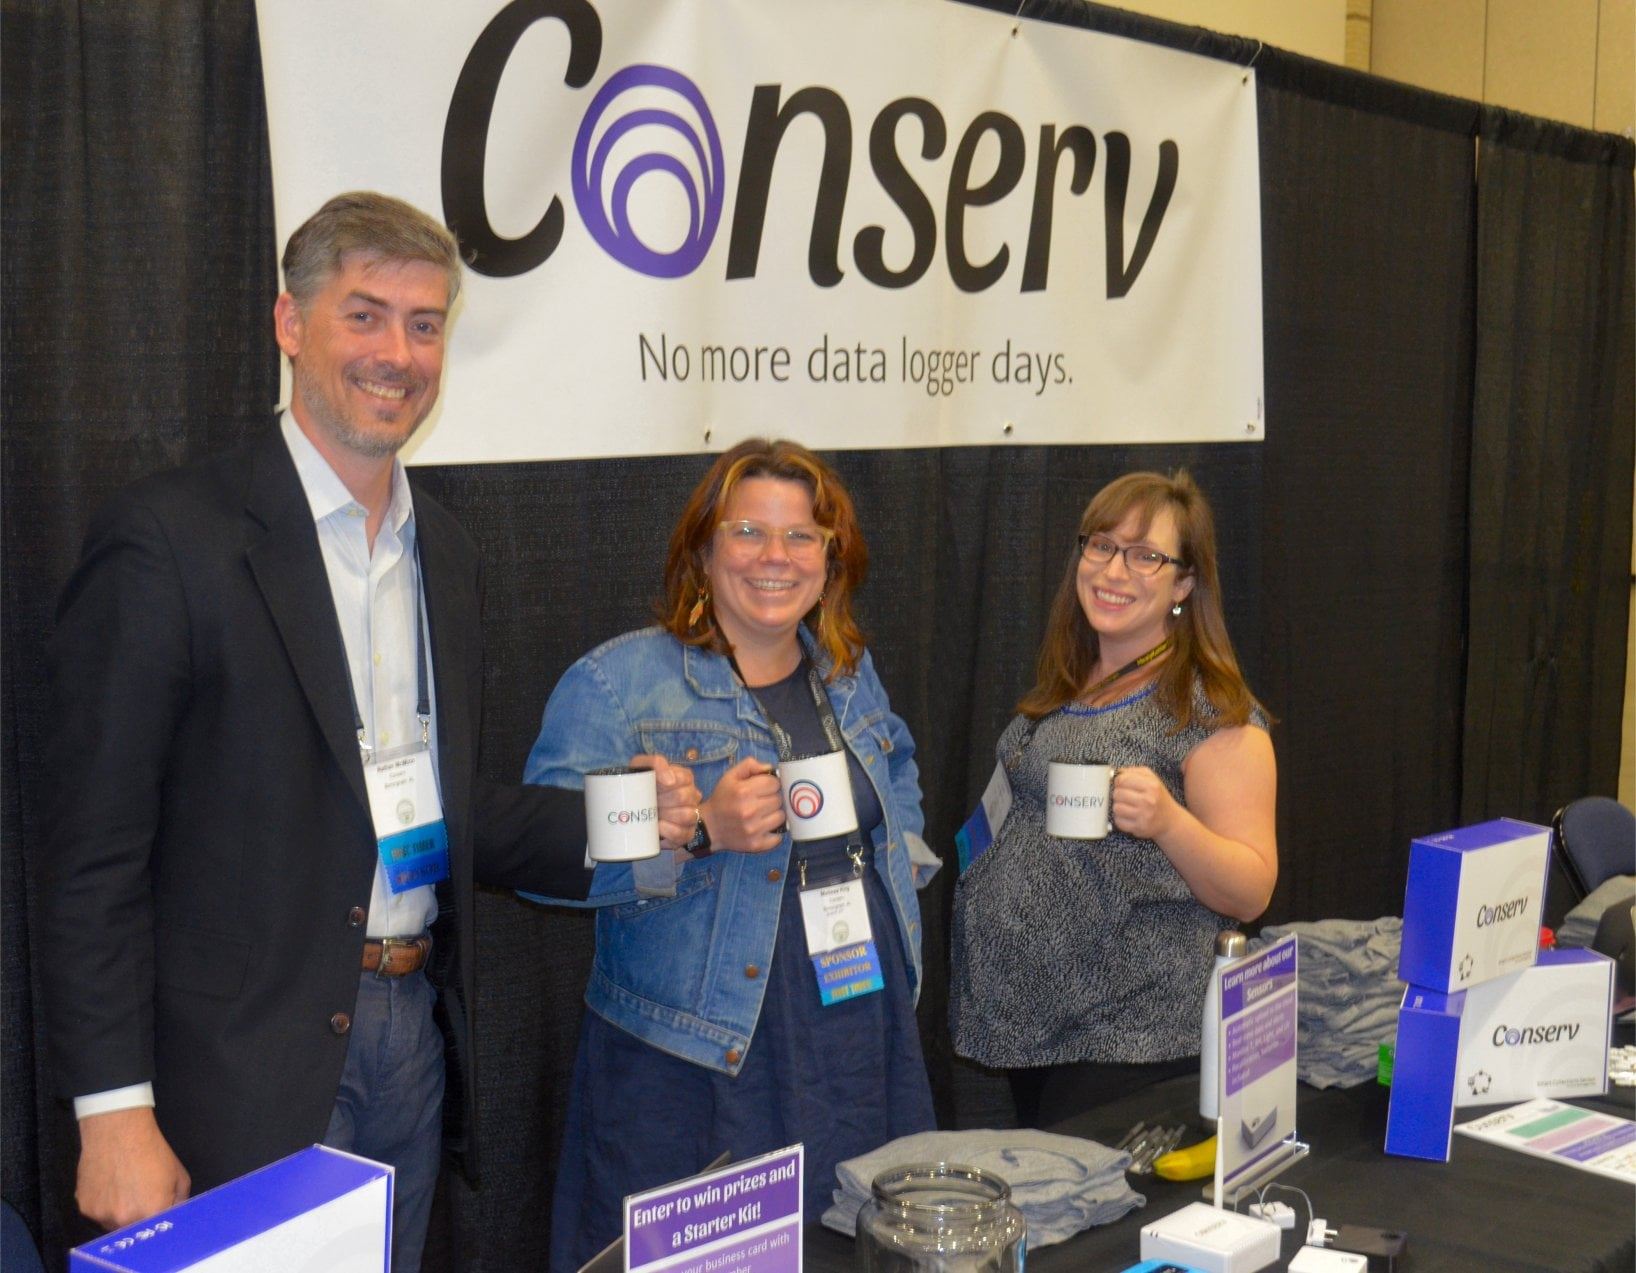 Medium shot of three Conserv team members at a stand with Conserv products. All three members are standing, smiling, and holding conserv mugs against a black curtain and a sign that reads "Conserv no more data logger days".